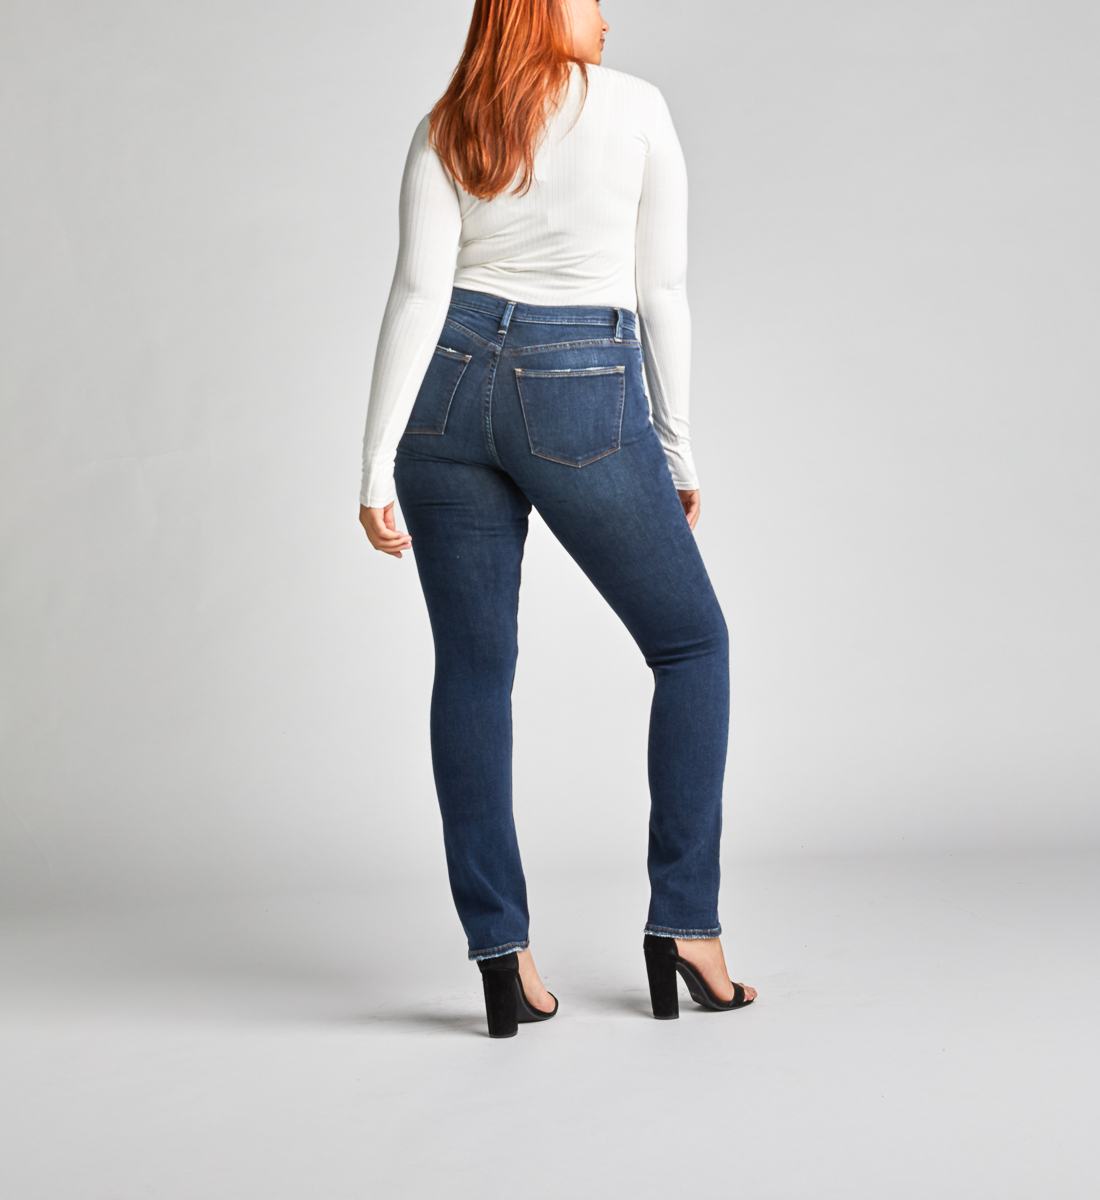 low waist jeans for girl